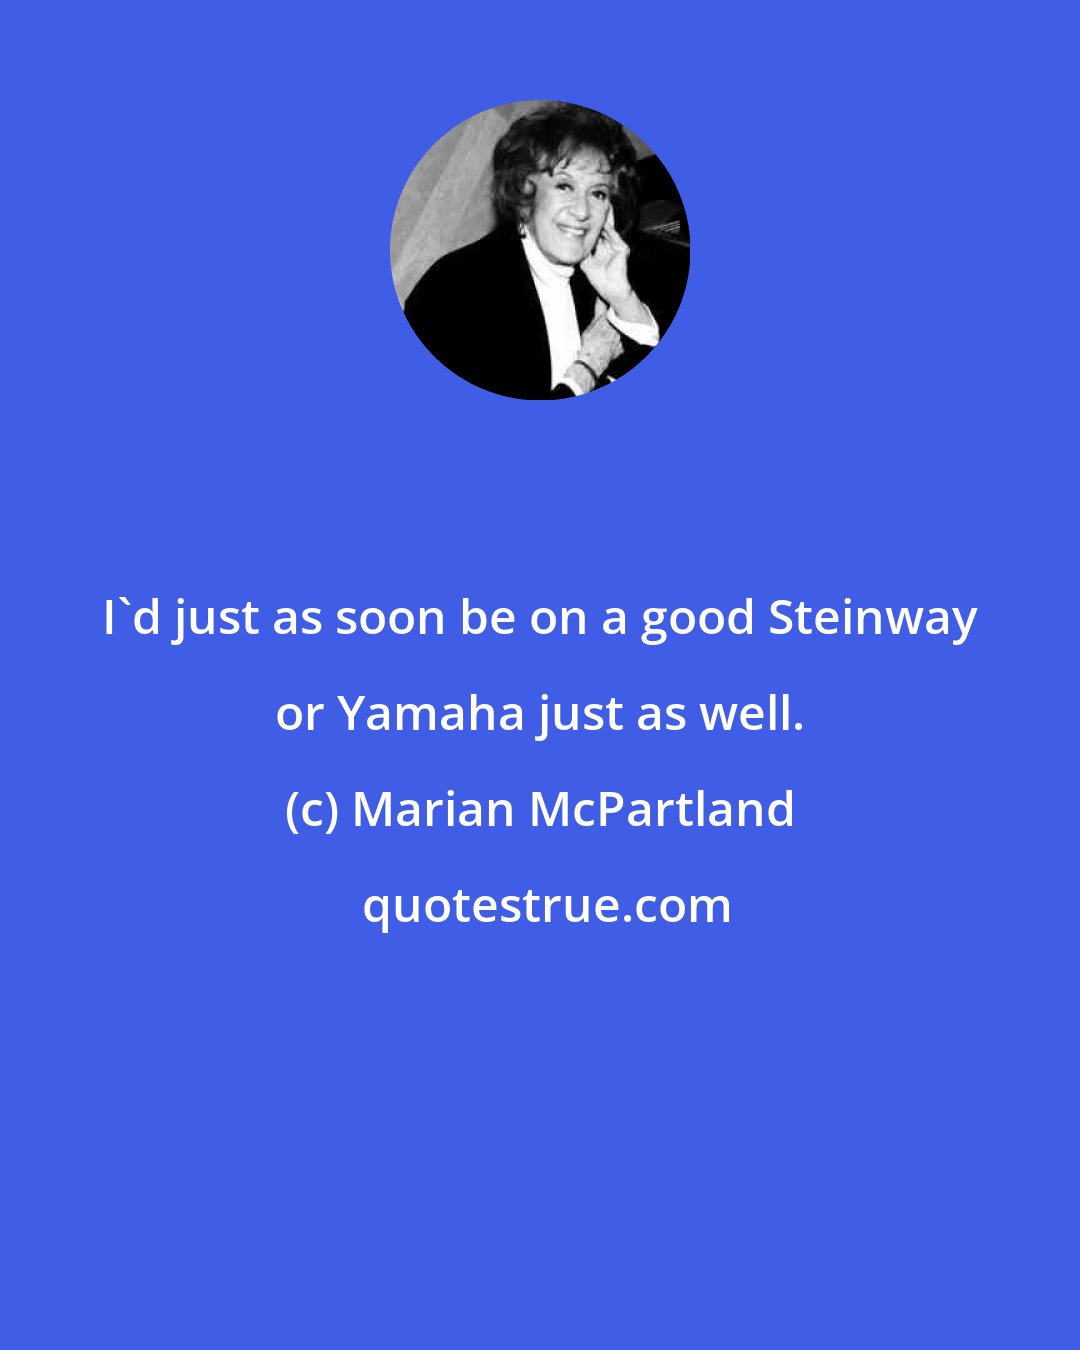 Marian McPartland: I'd just as soon be on a good Steinway or Yamaha just as well.